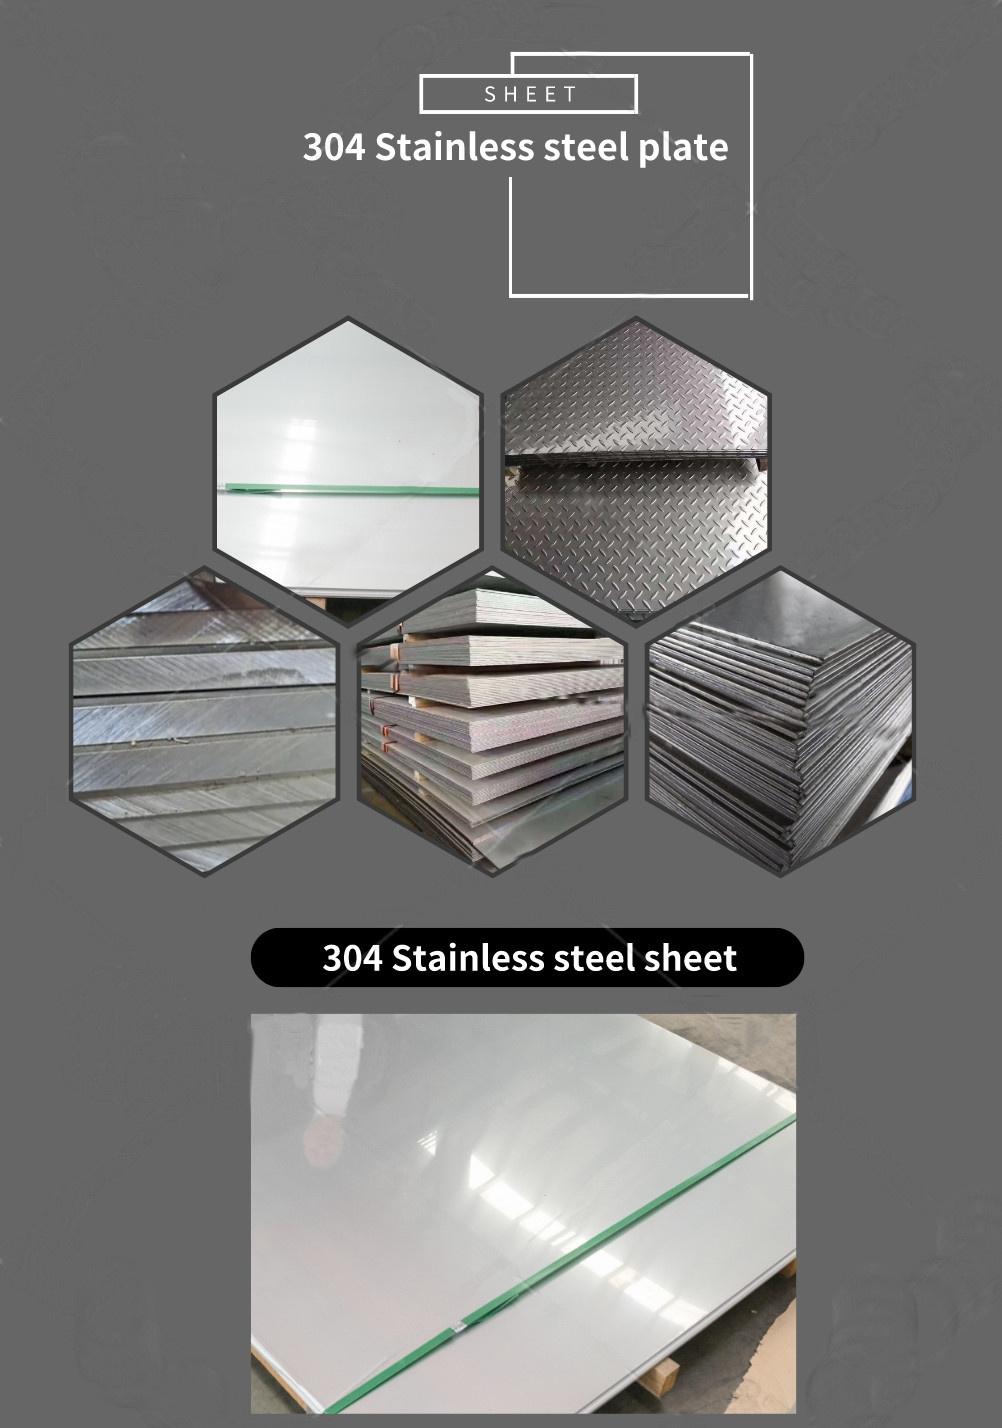 ASTM/GB/JIS 202 304 Hot Rolled Stainless Steel Plate for Boat Board